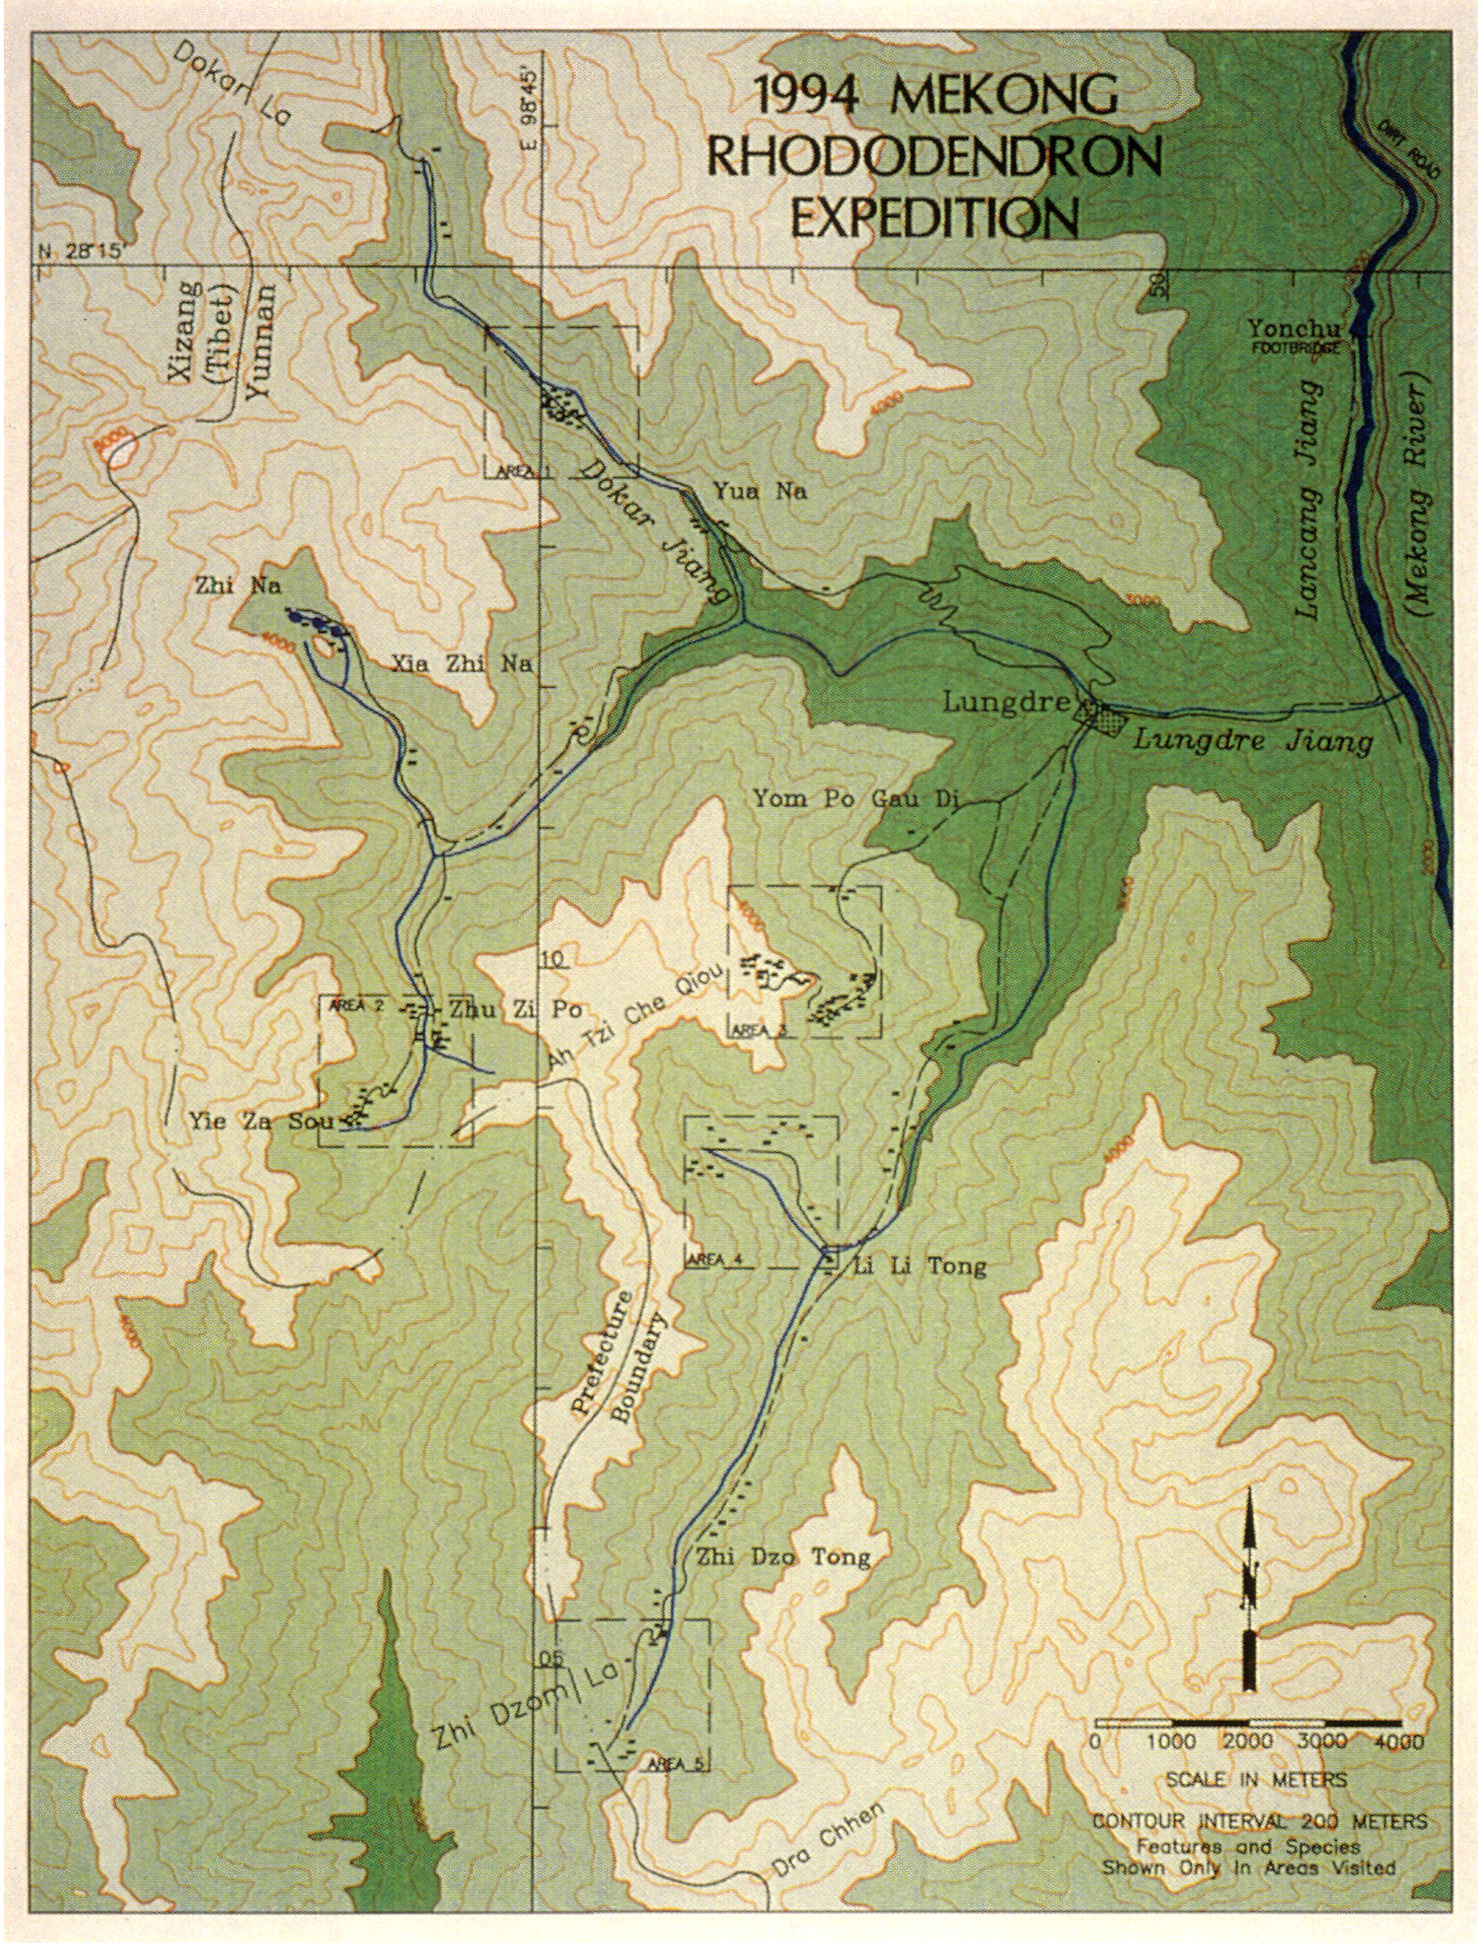 1994 Mekong Rhododendron
Expedition map